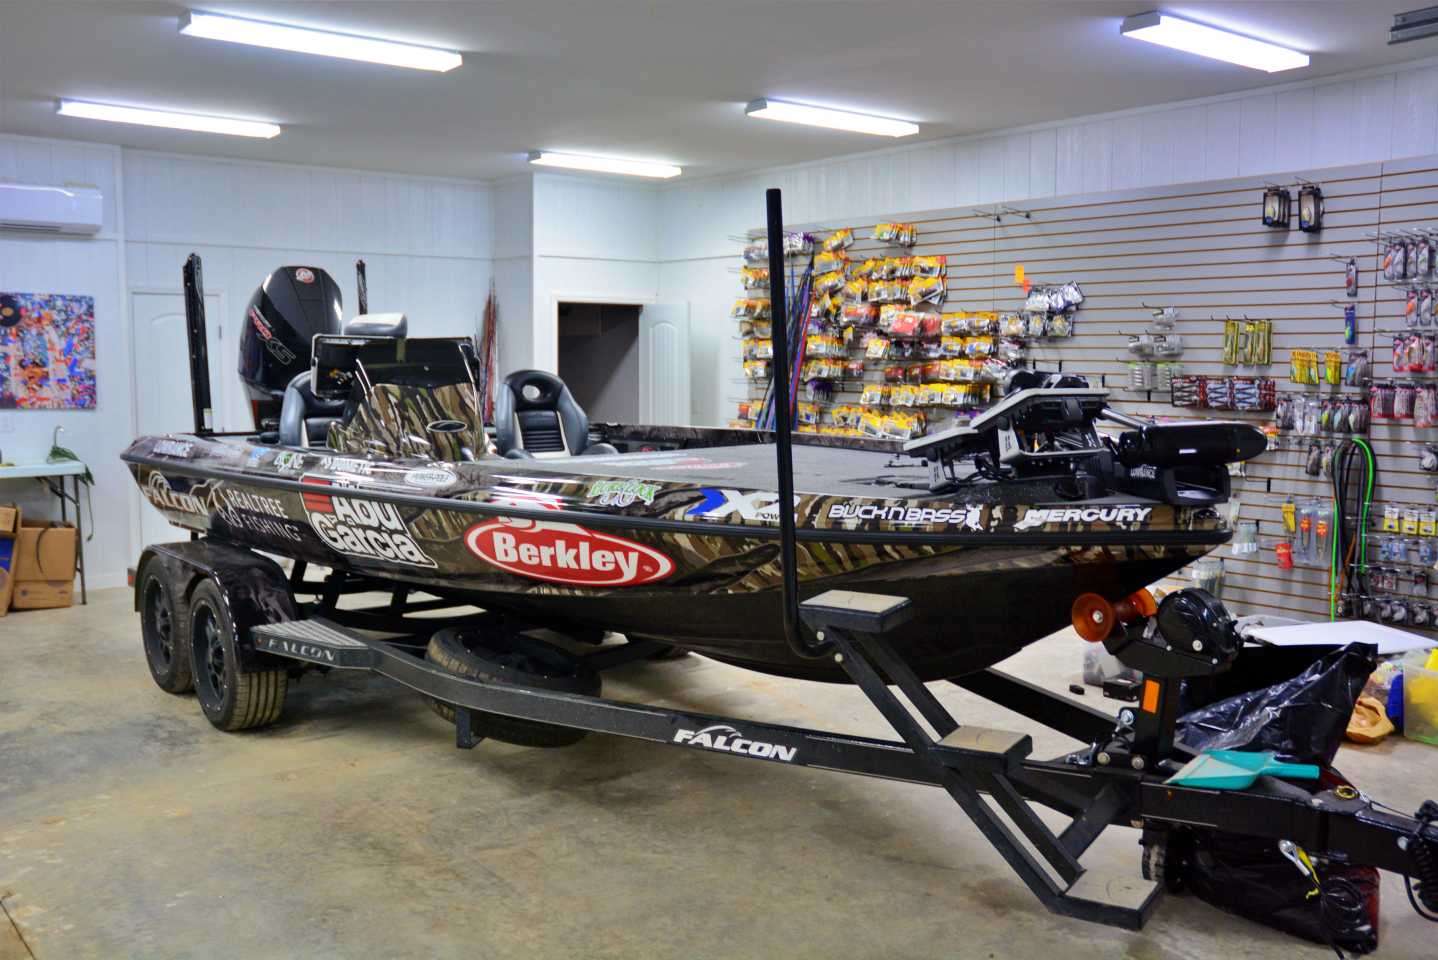 This season, Atkins is competing in a 2021 Falcon Boats F20 Predator, spanning 20 feet, 2 inches with a 99-inch beam, and fuel capacity of 50 gallons.  